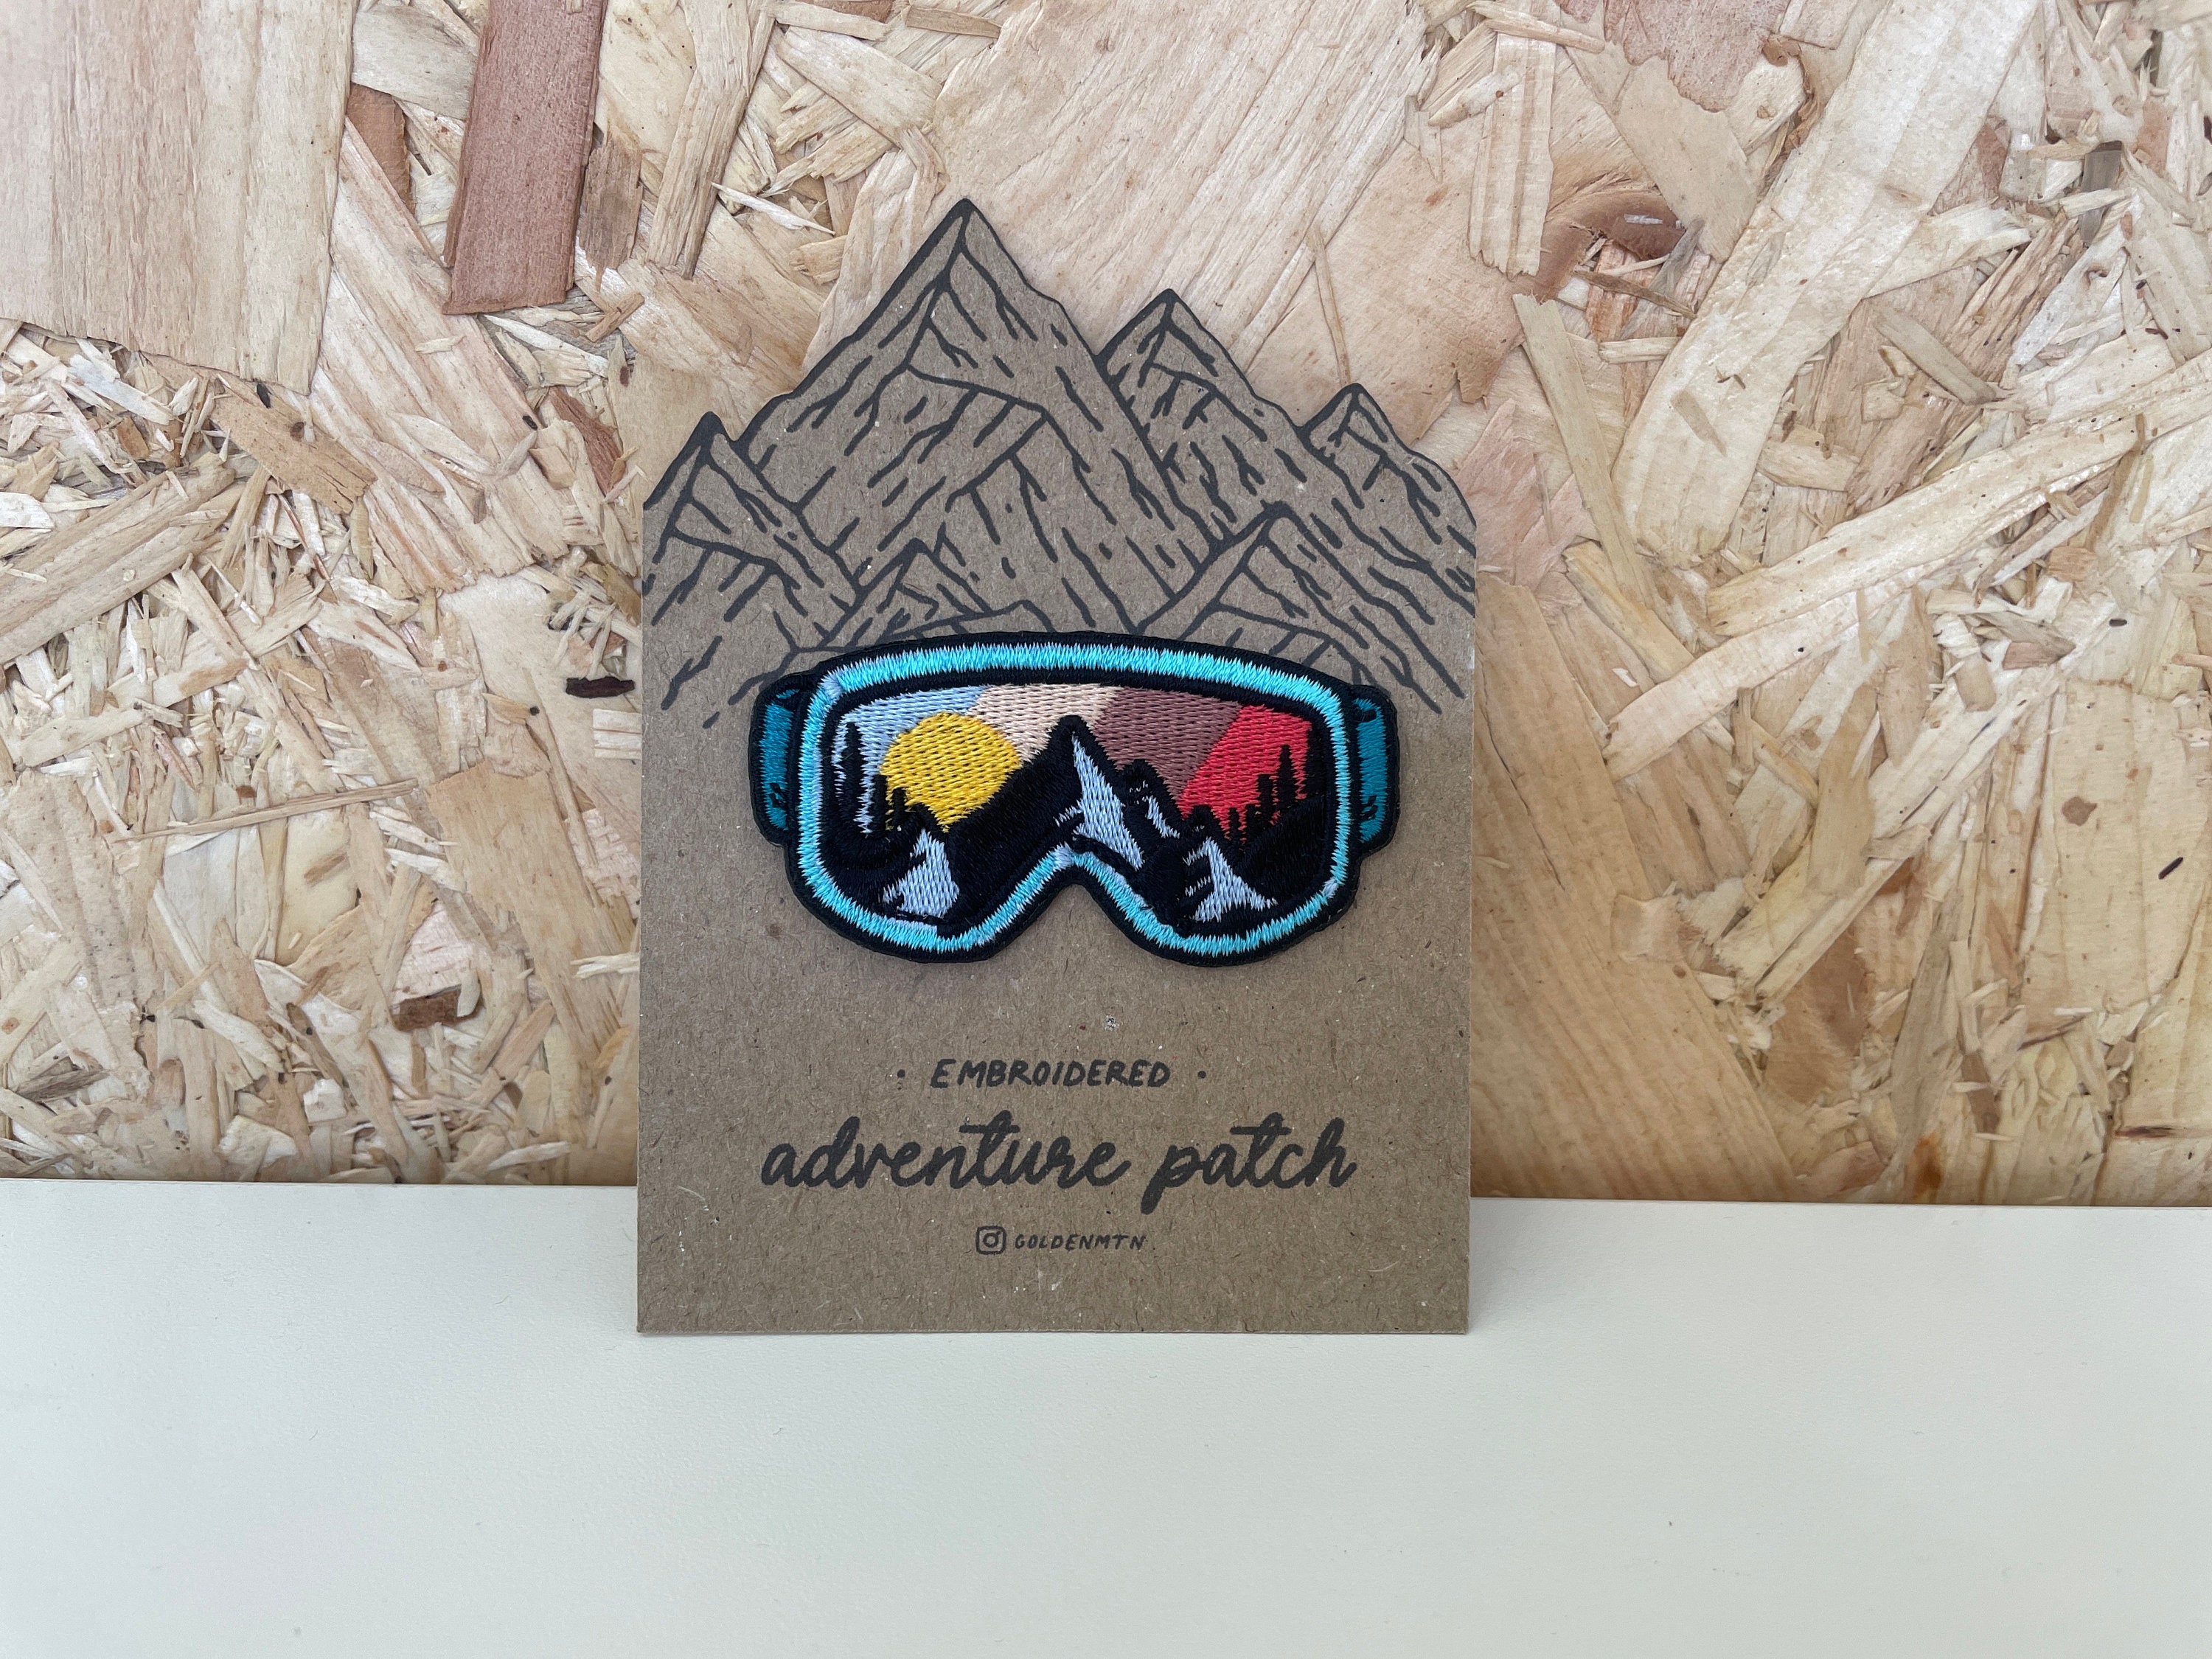 Skiing Embroidery Patch - Ski or Snowboarding Goggles Nature Embroidered  Patch - Iron-On Patches For Hats, Jeans, Jackets & More #B182